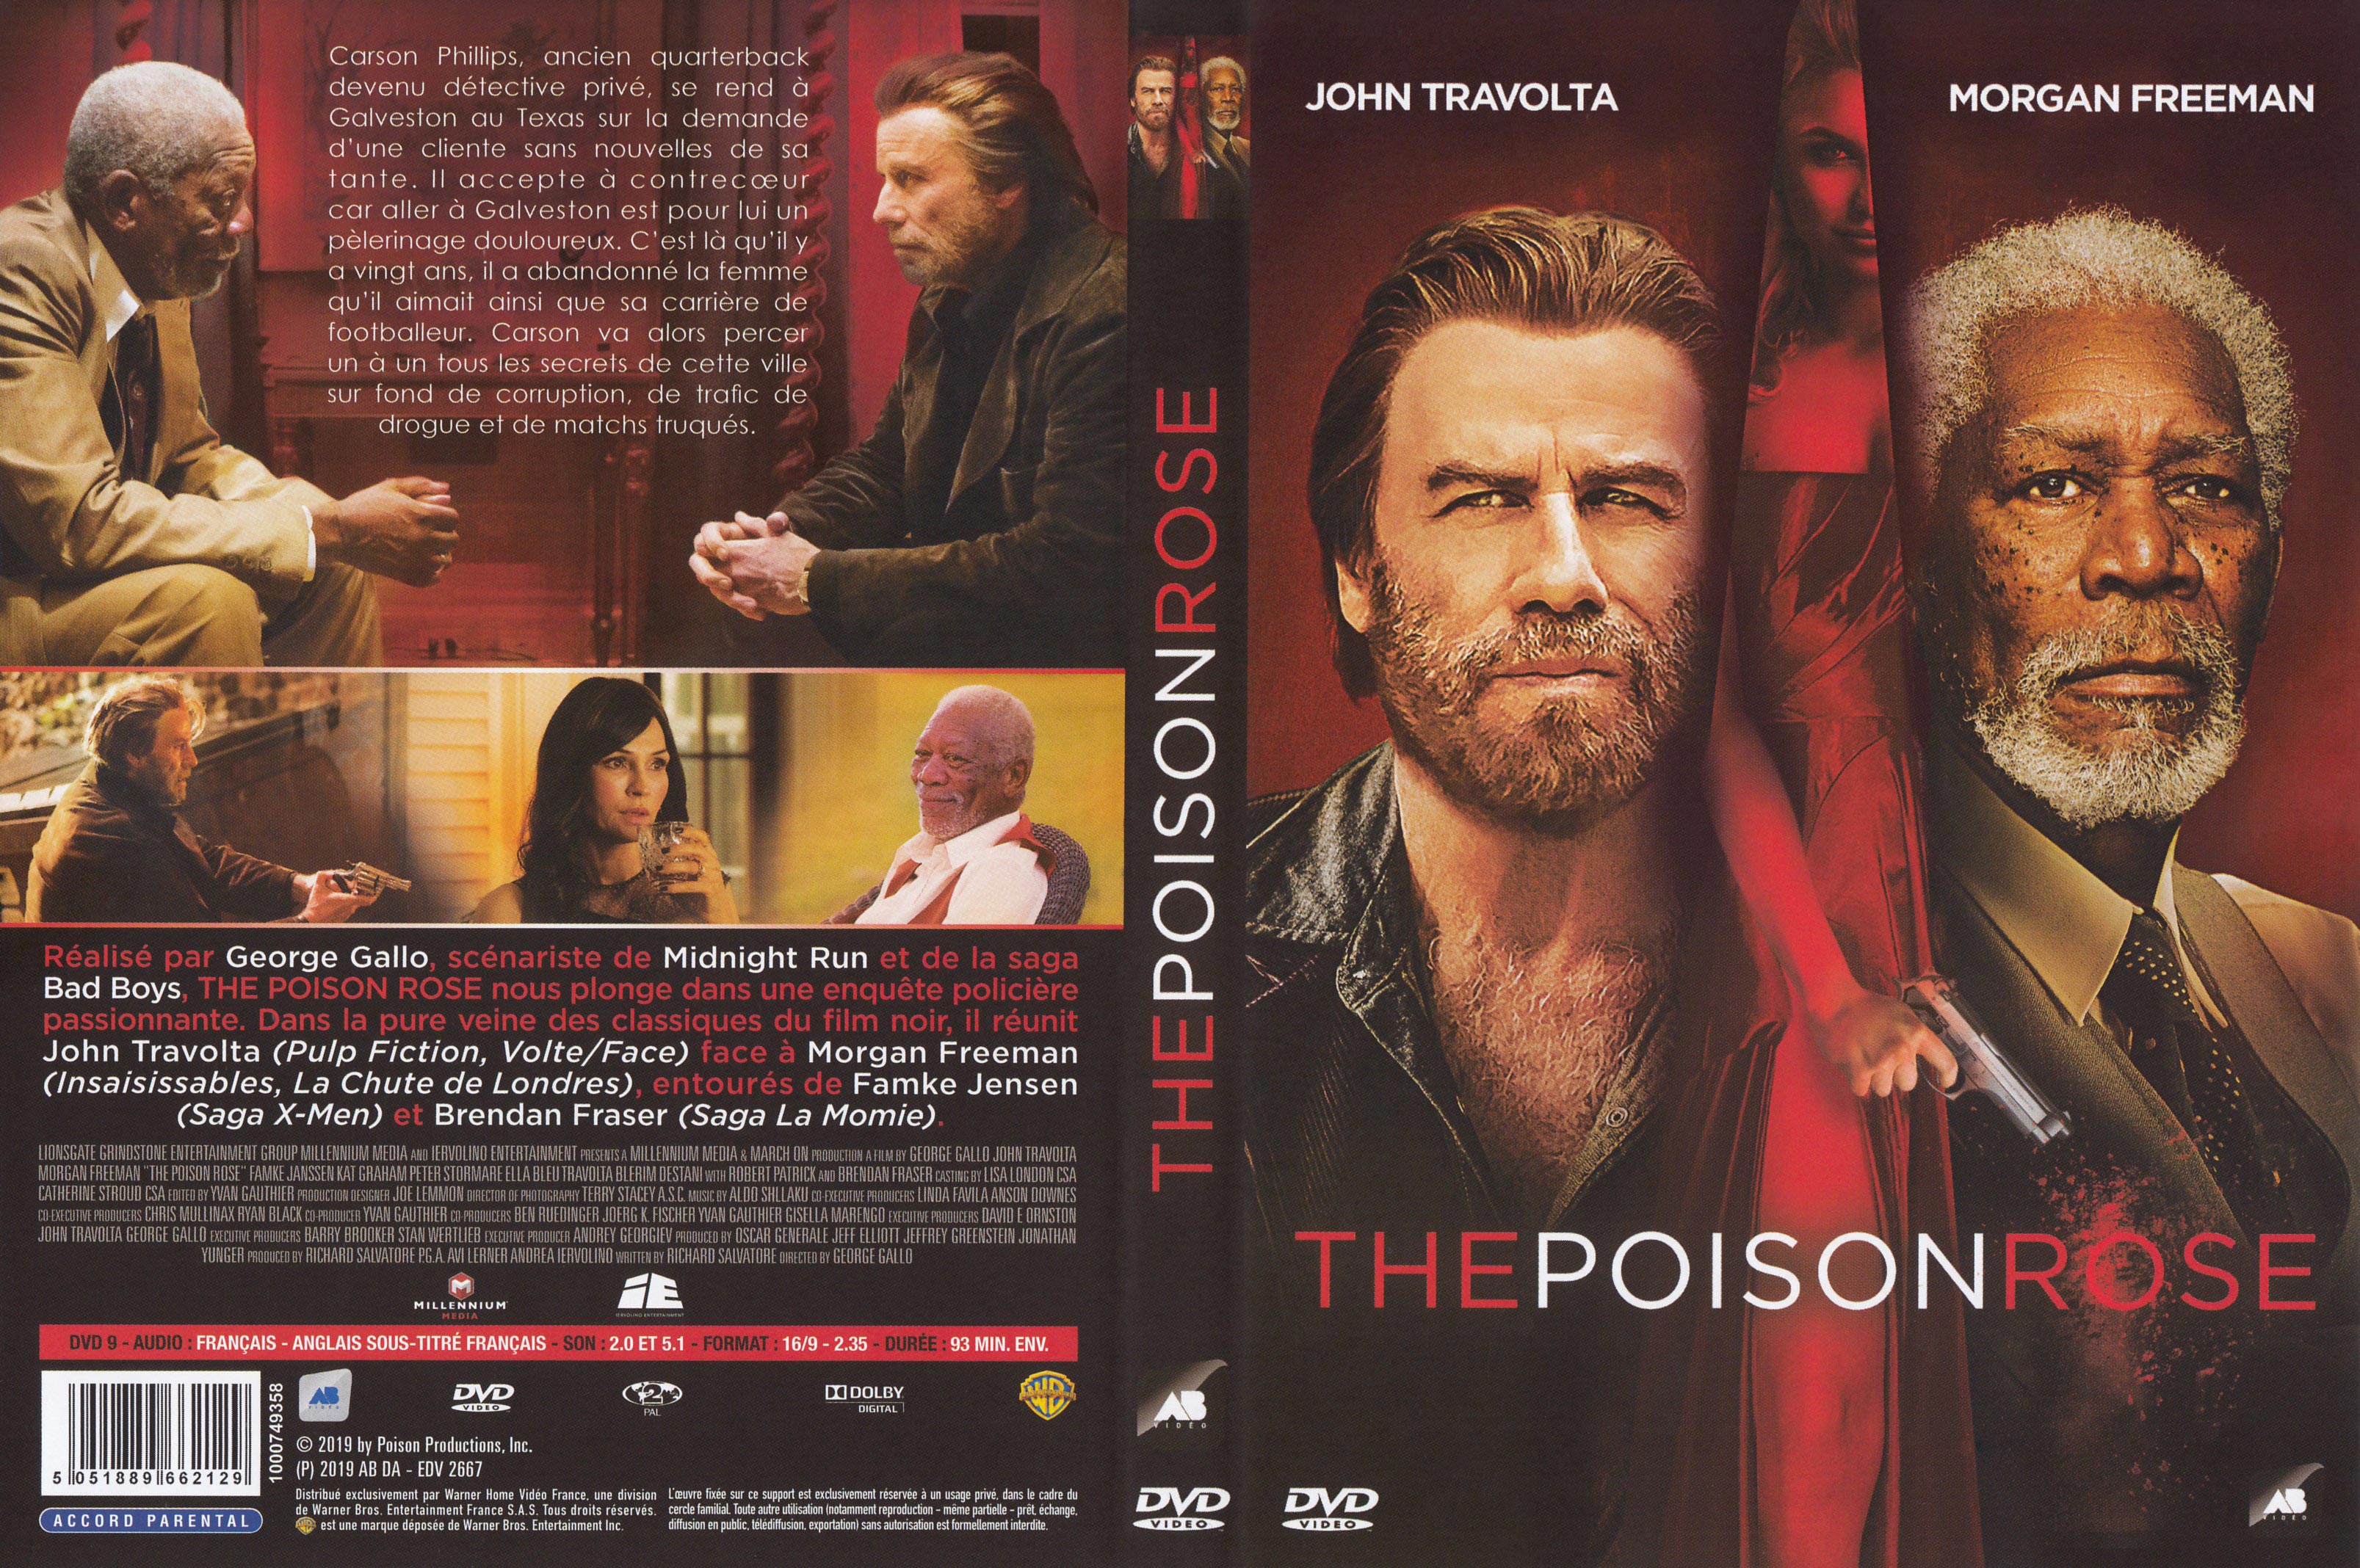 Jaquette DVD The poison rose